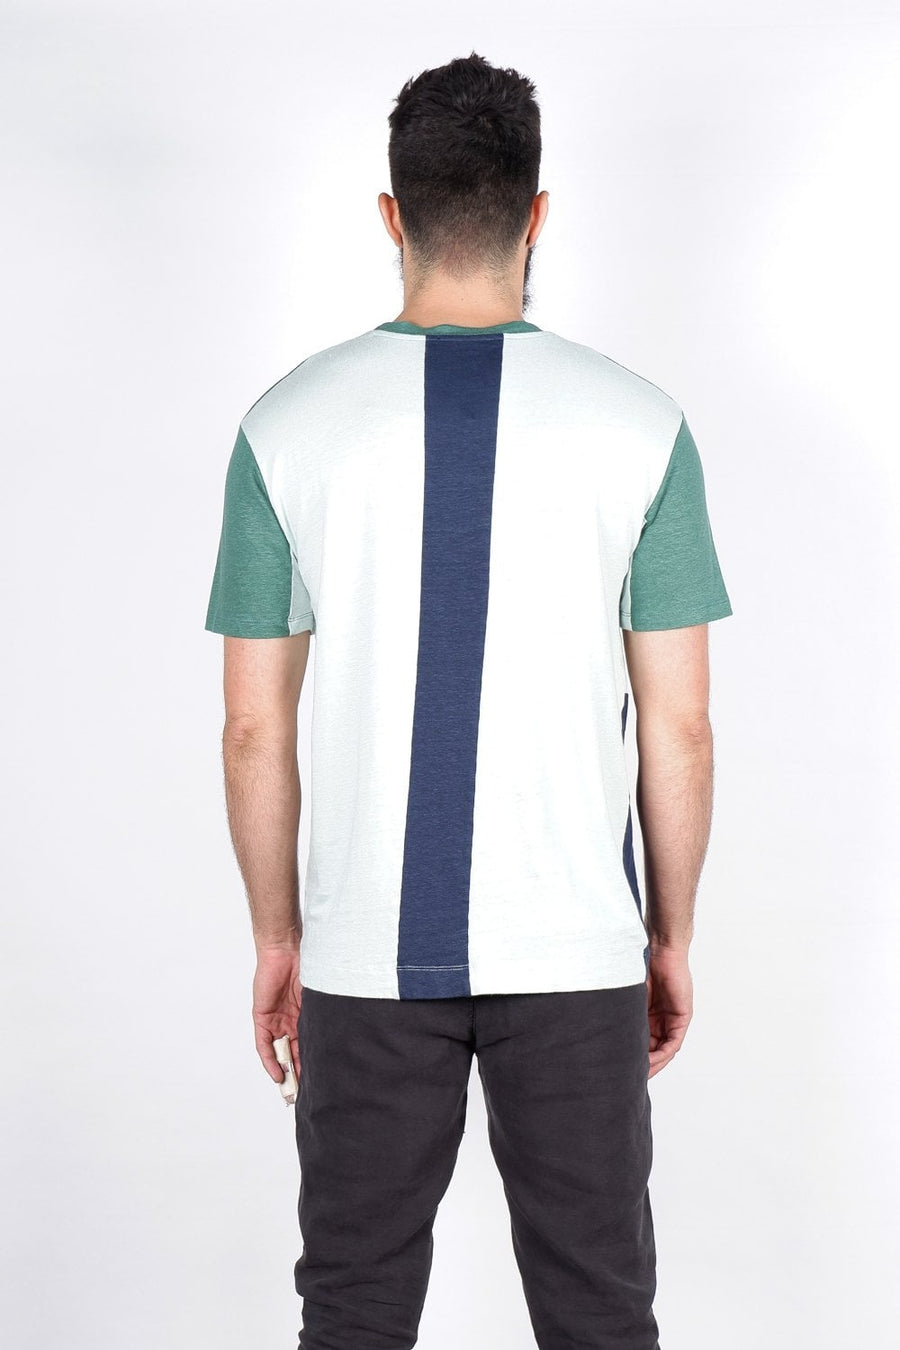 Buy the Daniele Fiesoli Block Stripe TShirt Green/Navy at Intro. Spend £50 for free UK delivery. Official stockists. We ship worldwide.